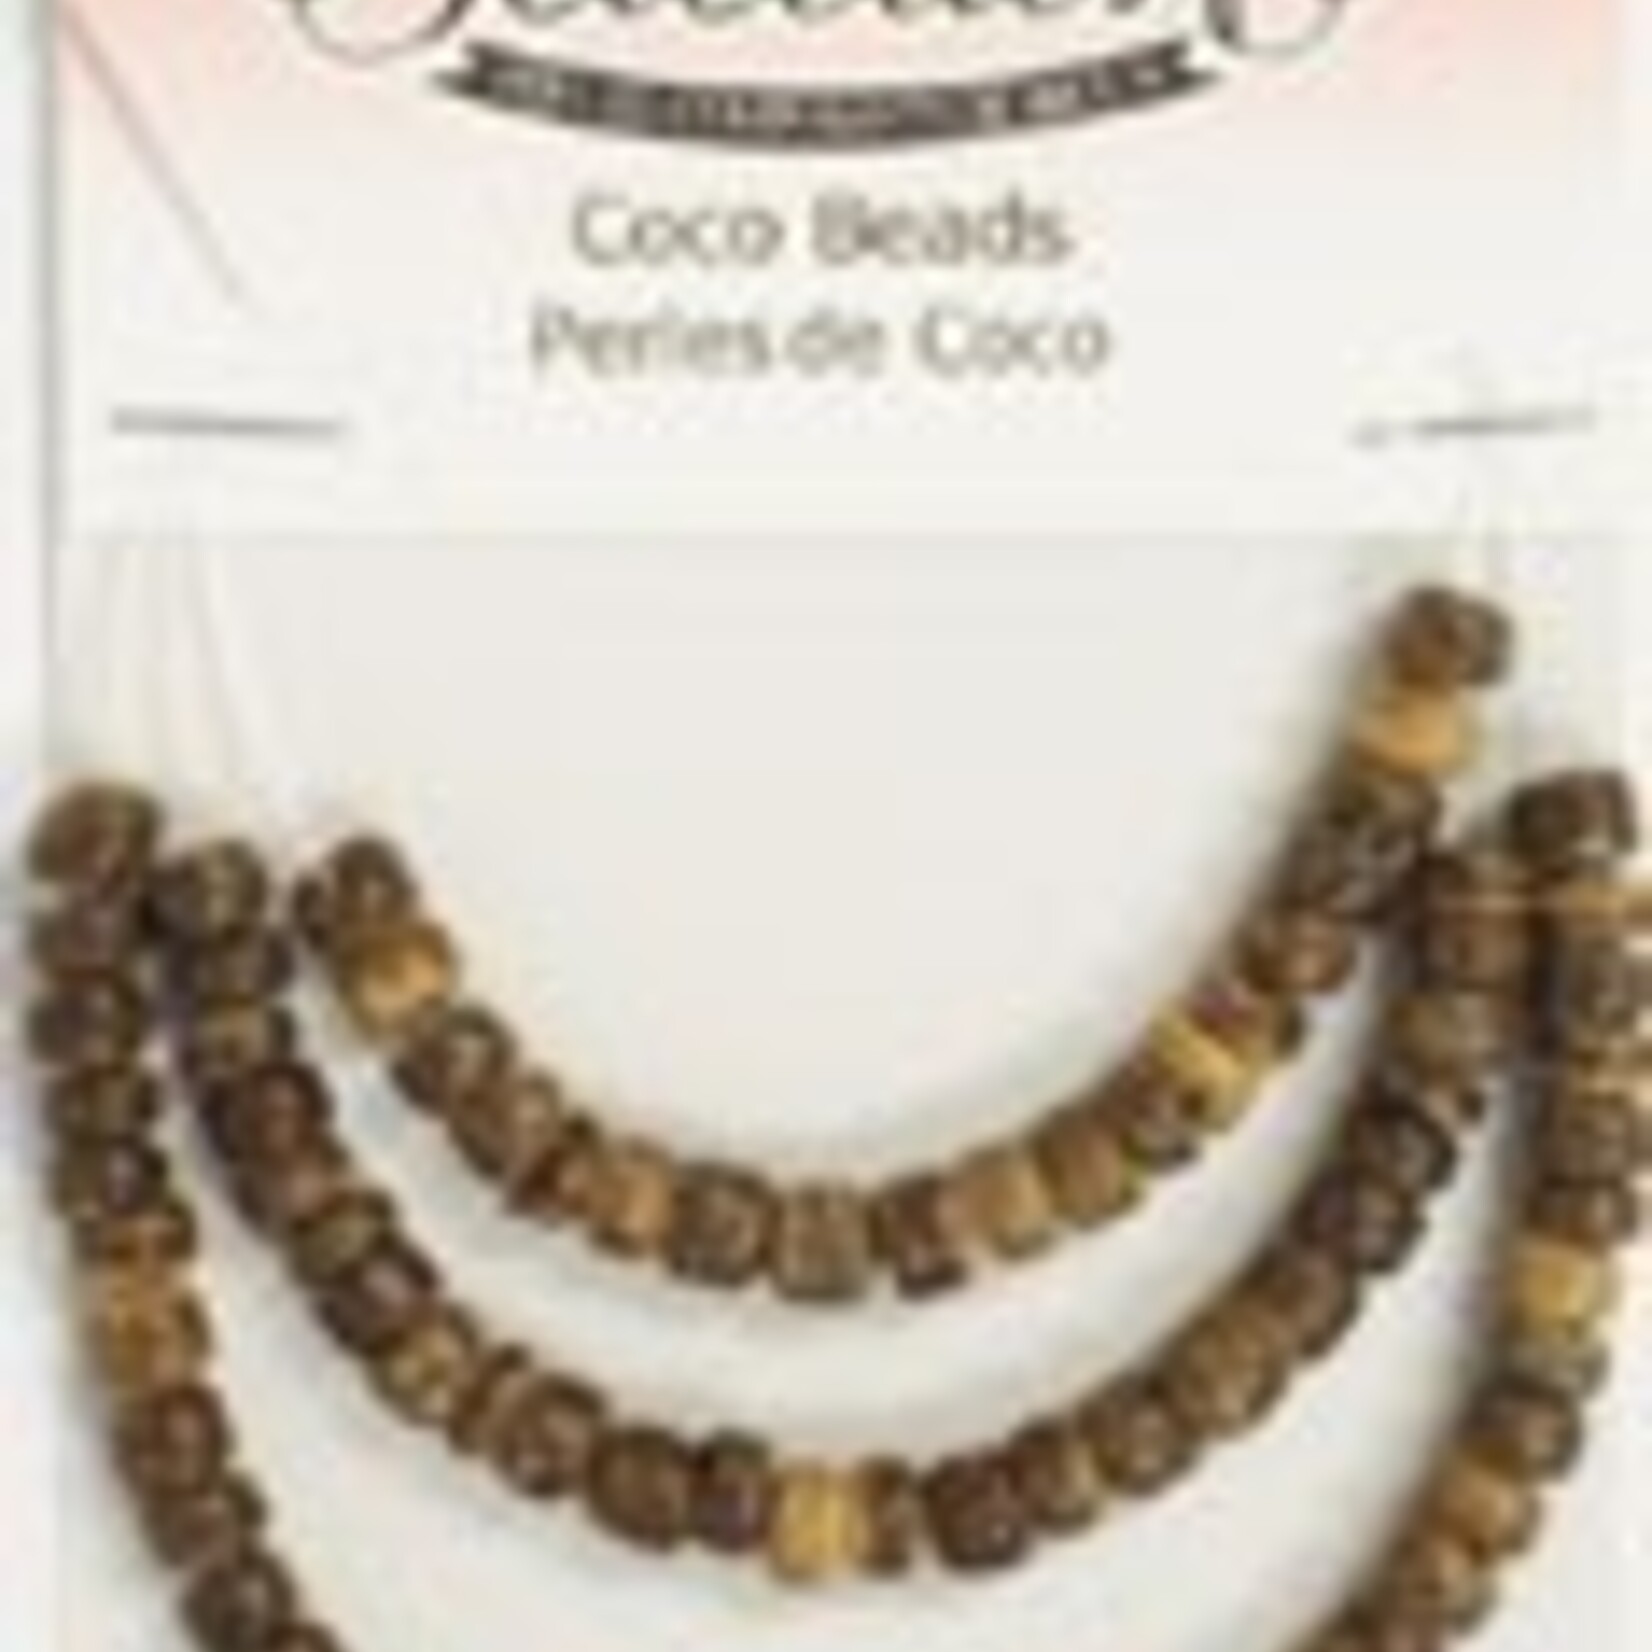 Coco Beads 4mm